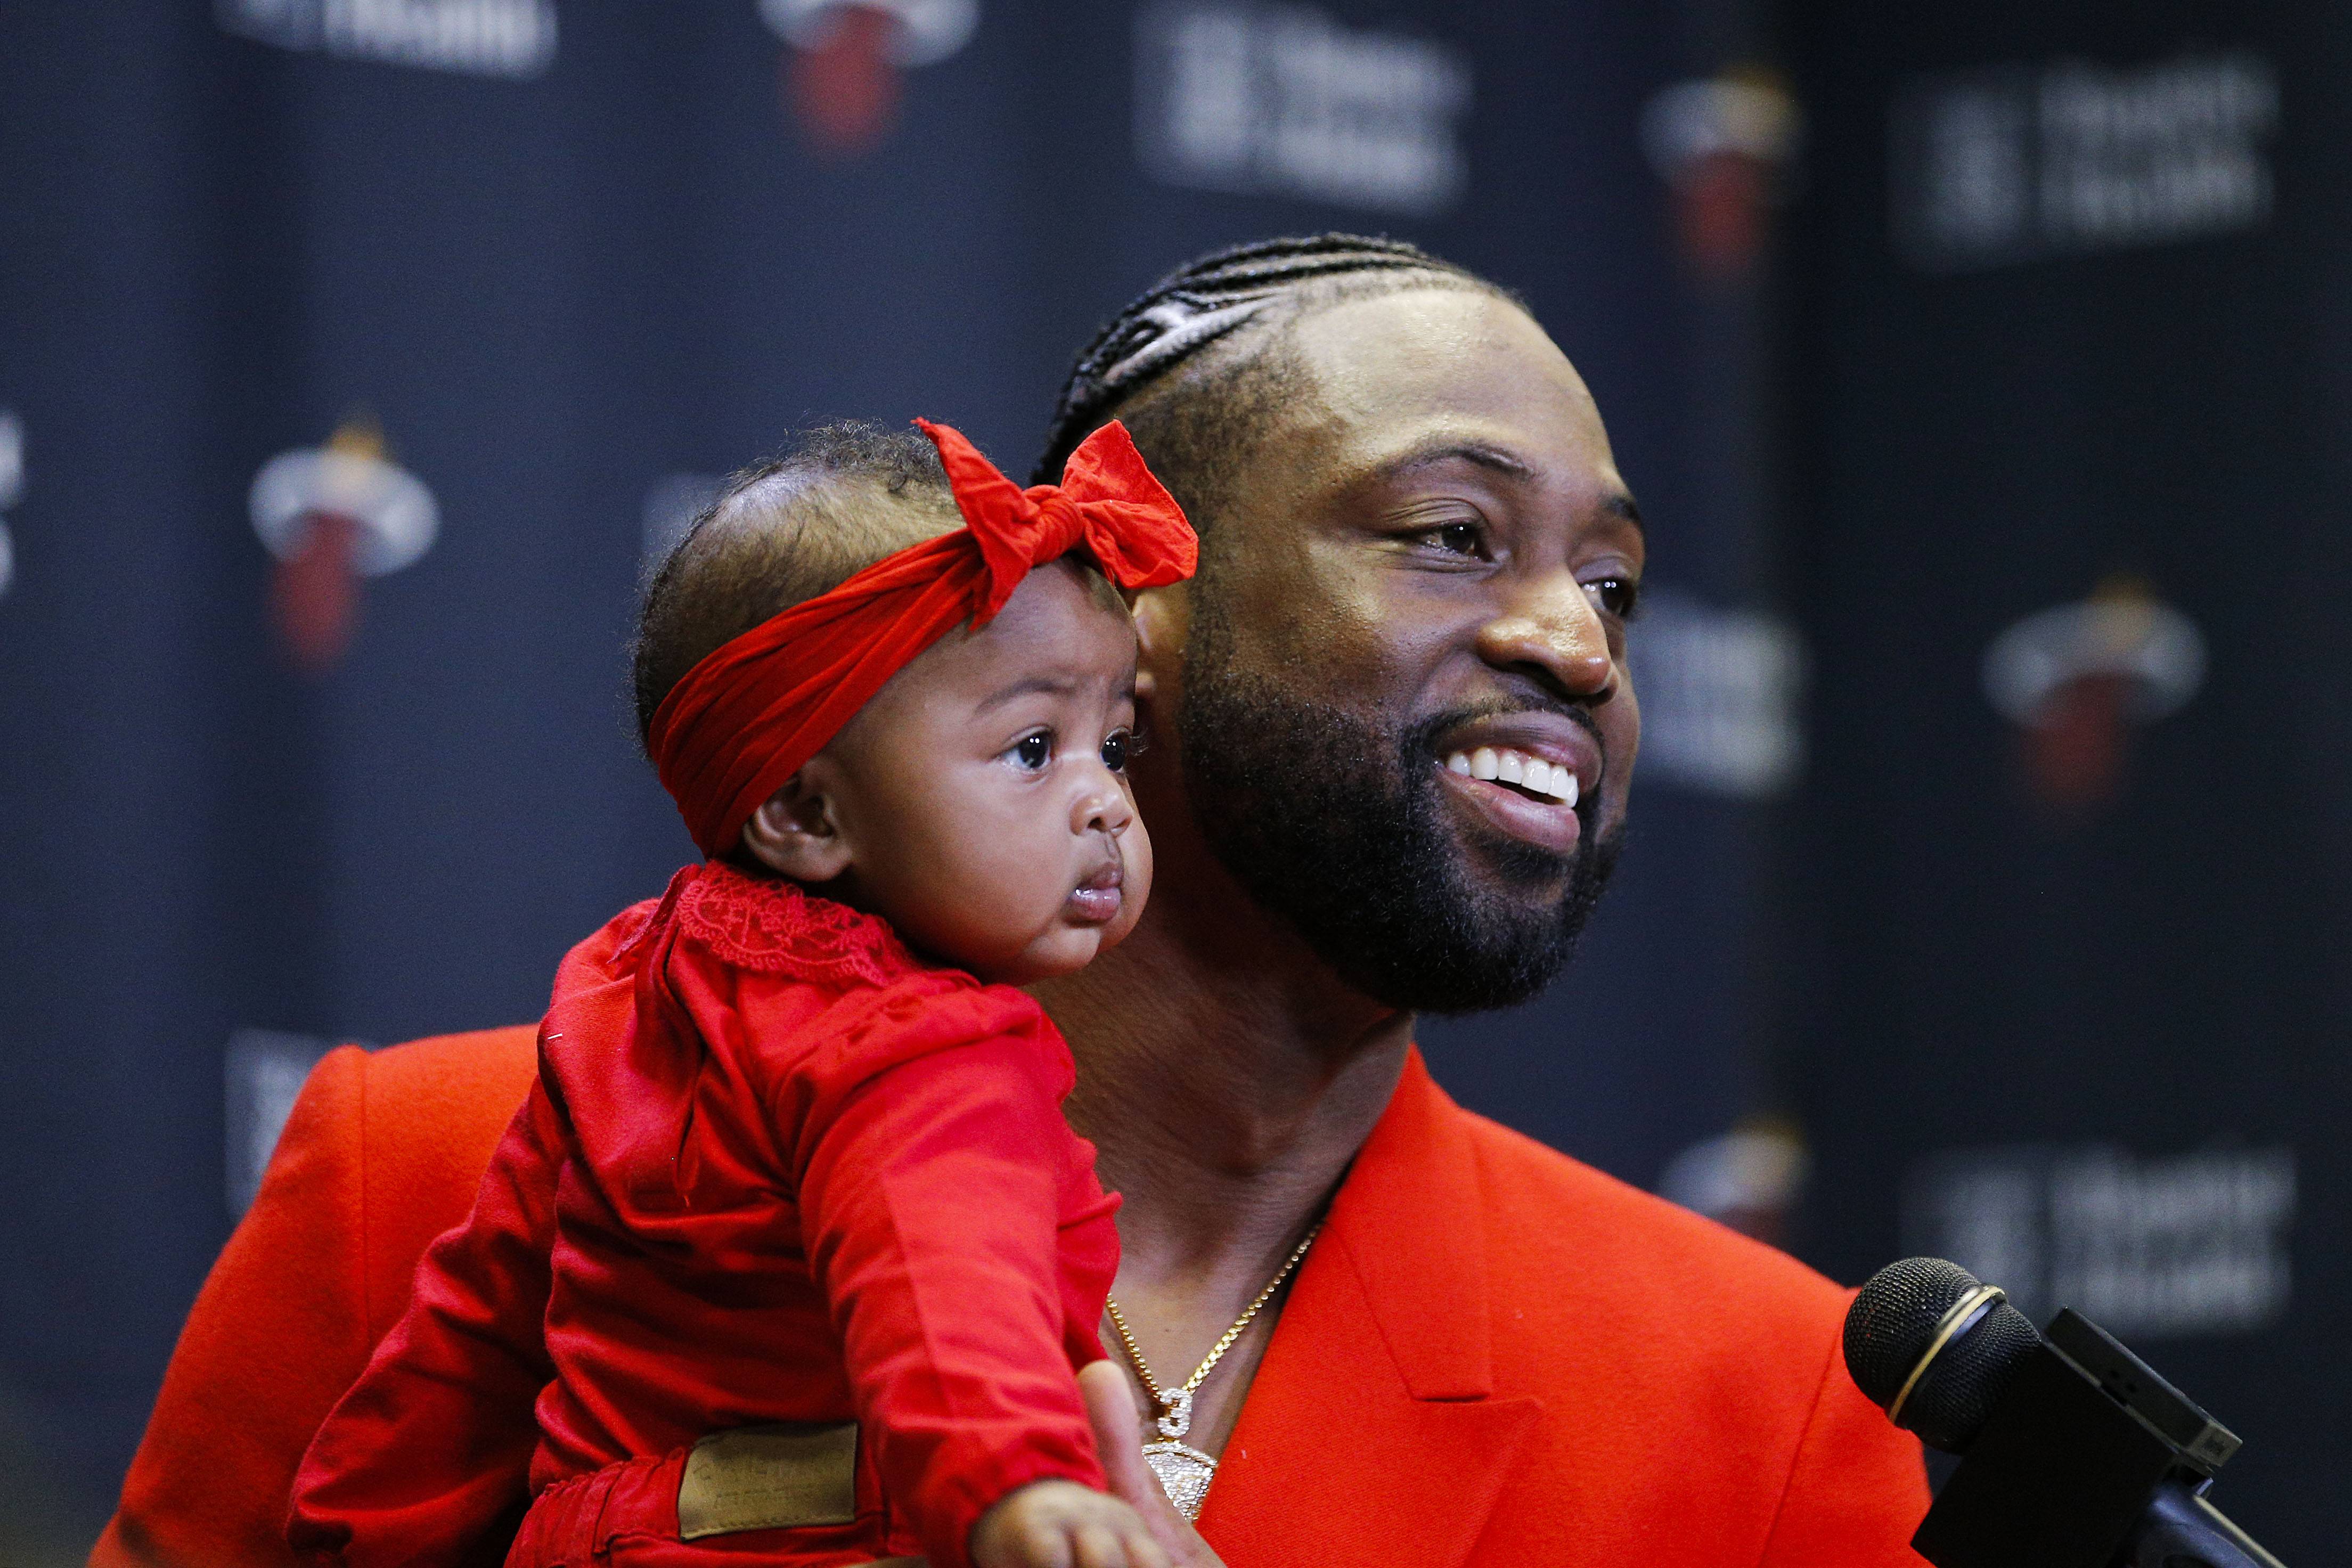 MIAMI, FLORIDA - APRIL 09: Dwyane Wade #3 of the Miami Heat addresses the media after his final regular season home game at American Airlines Arena with his daughter, Kaavia James Union Wade, on April 09, 2019 in Miami, Florida. NOTE TO USER: User expressly acknowledges and agrees that, by downloading and or using this photograph, User is consenting to the terms and conditions of the Getty Images License Agreement.  (Photo by Michael Reaves/Getty Images)